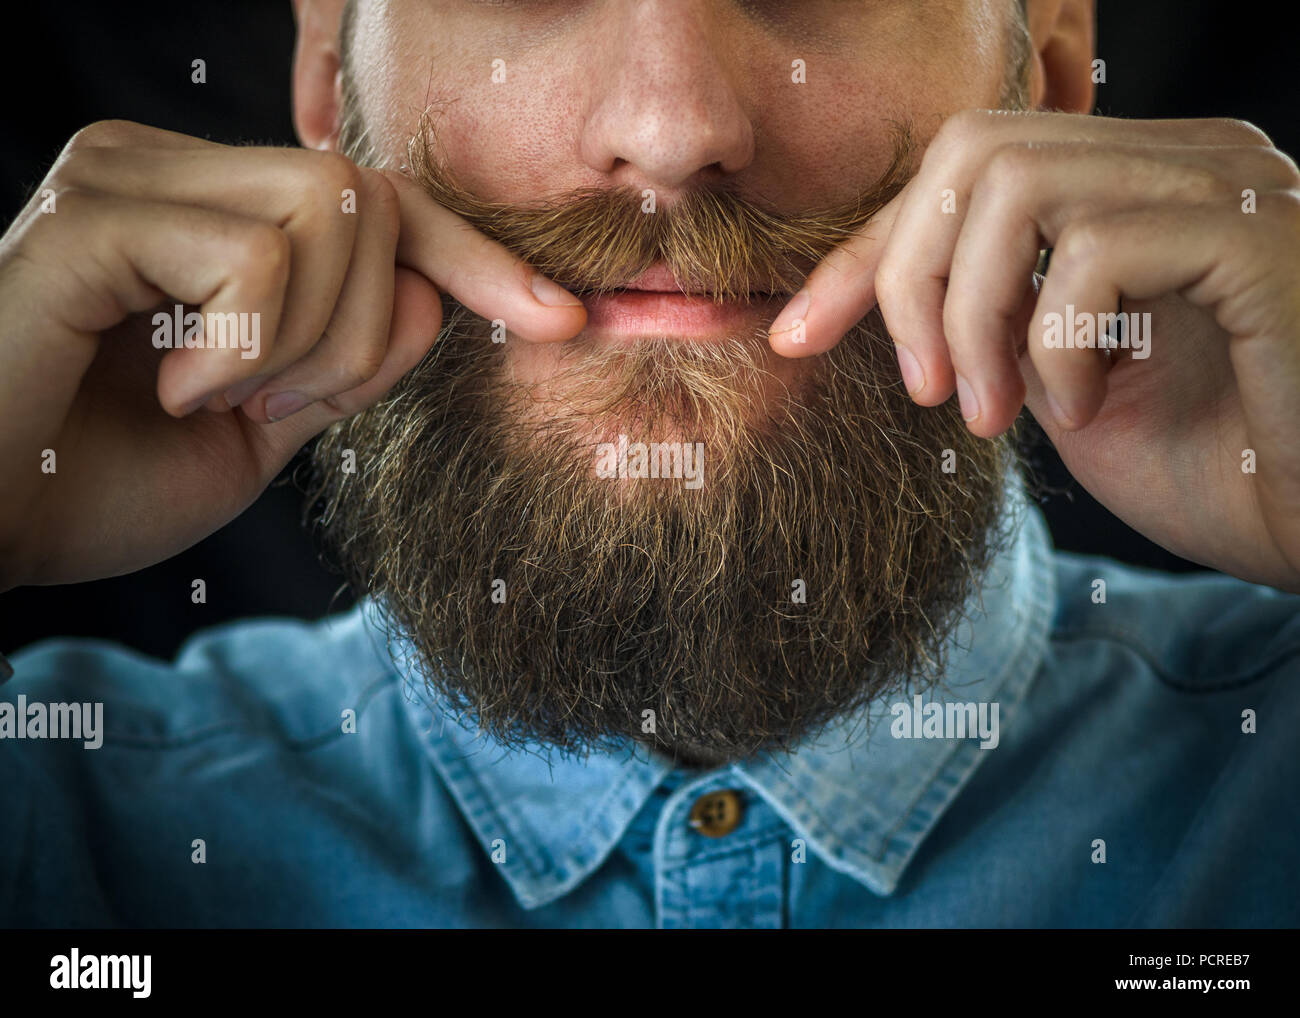 Bearded Man in a Blue Denim Shirt Twirling His Mustache with His Fingers. Portrait of a Hipster on Black Background Closeup Stock Photo